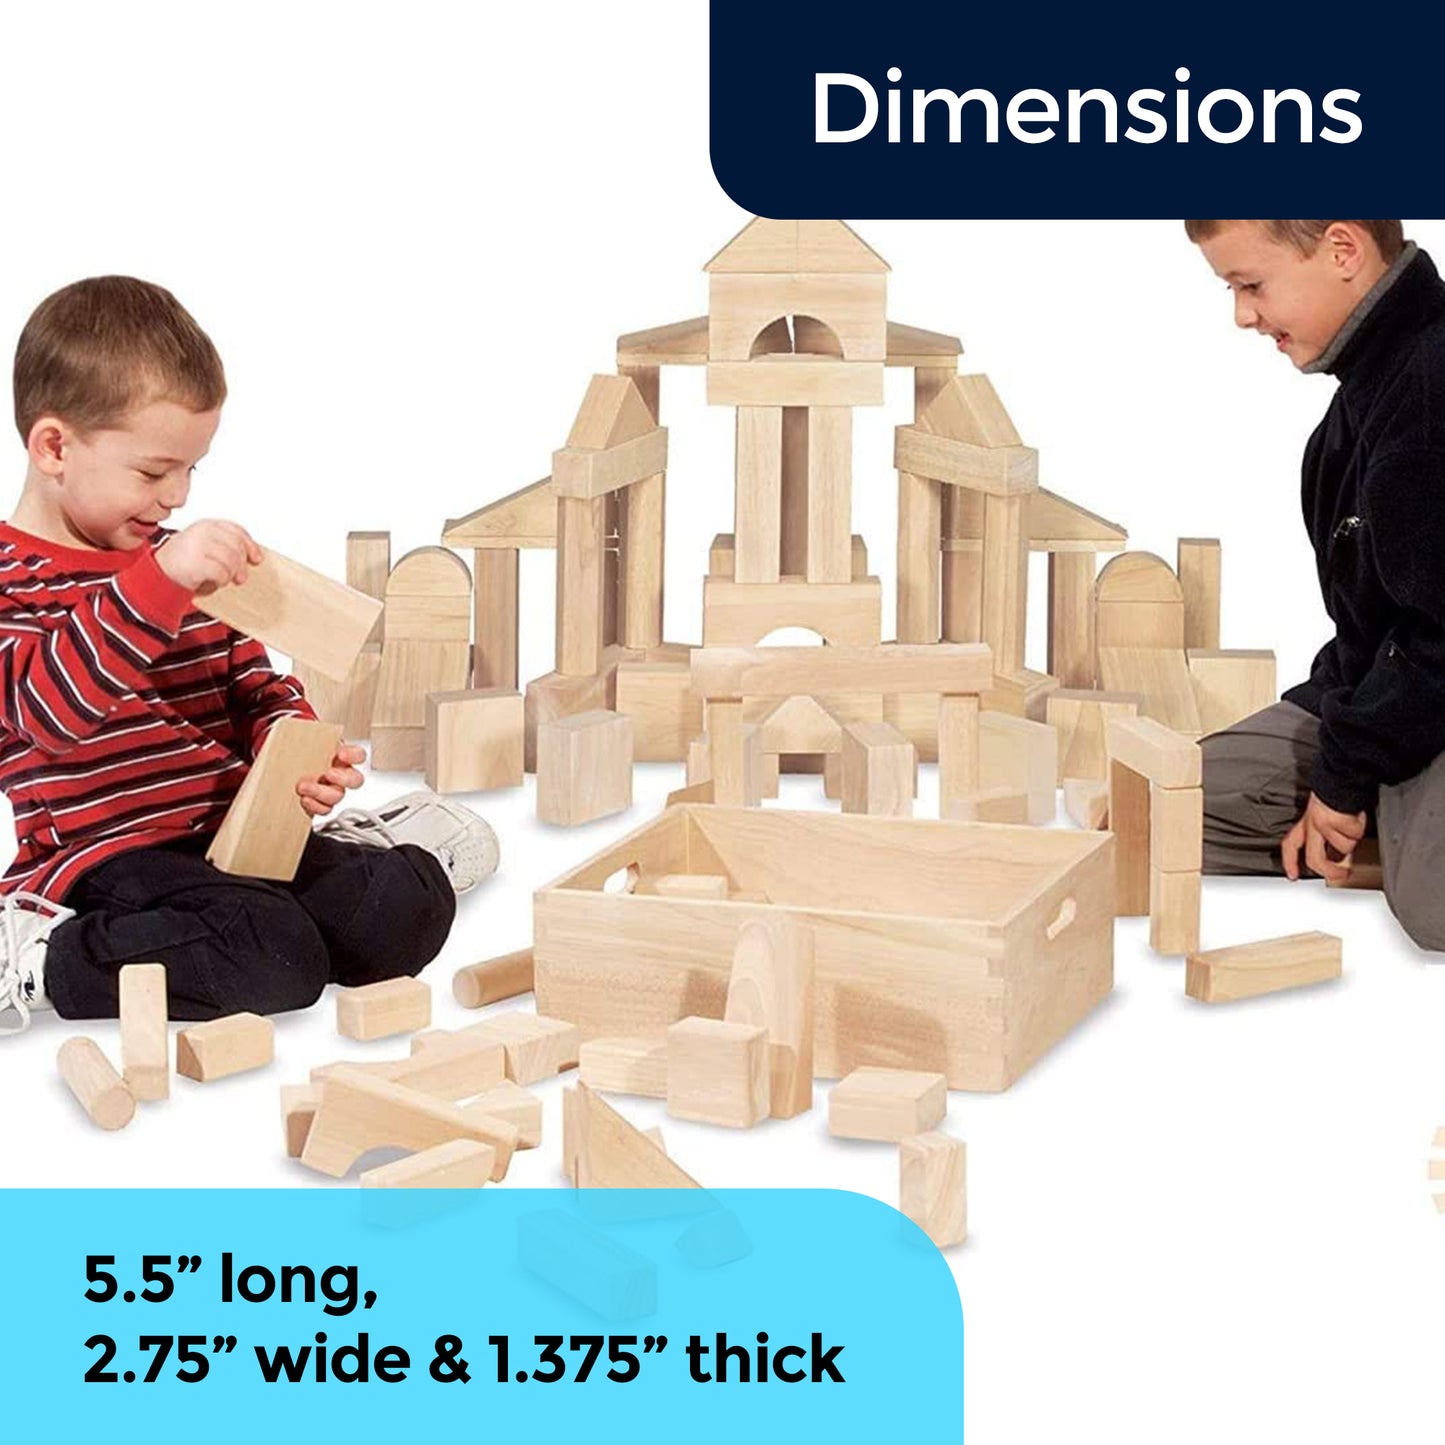 Standard Unit Wood Building Blocks for Toddlers with Storage Tray (64 Pcs)